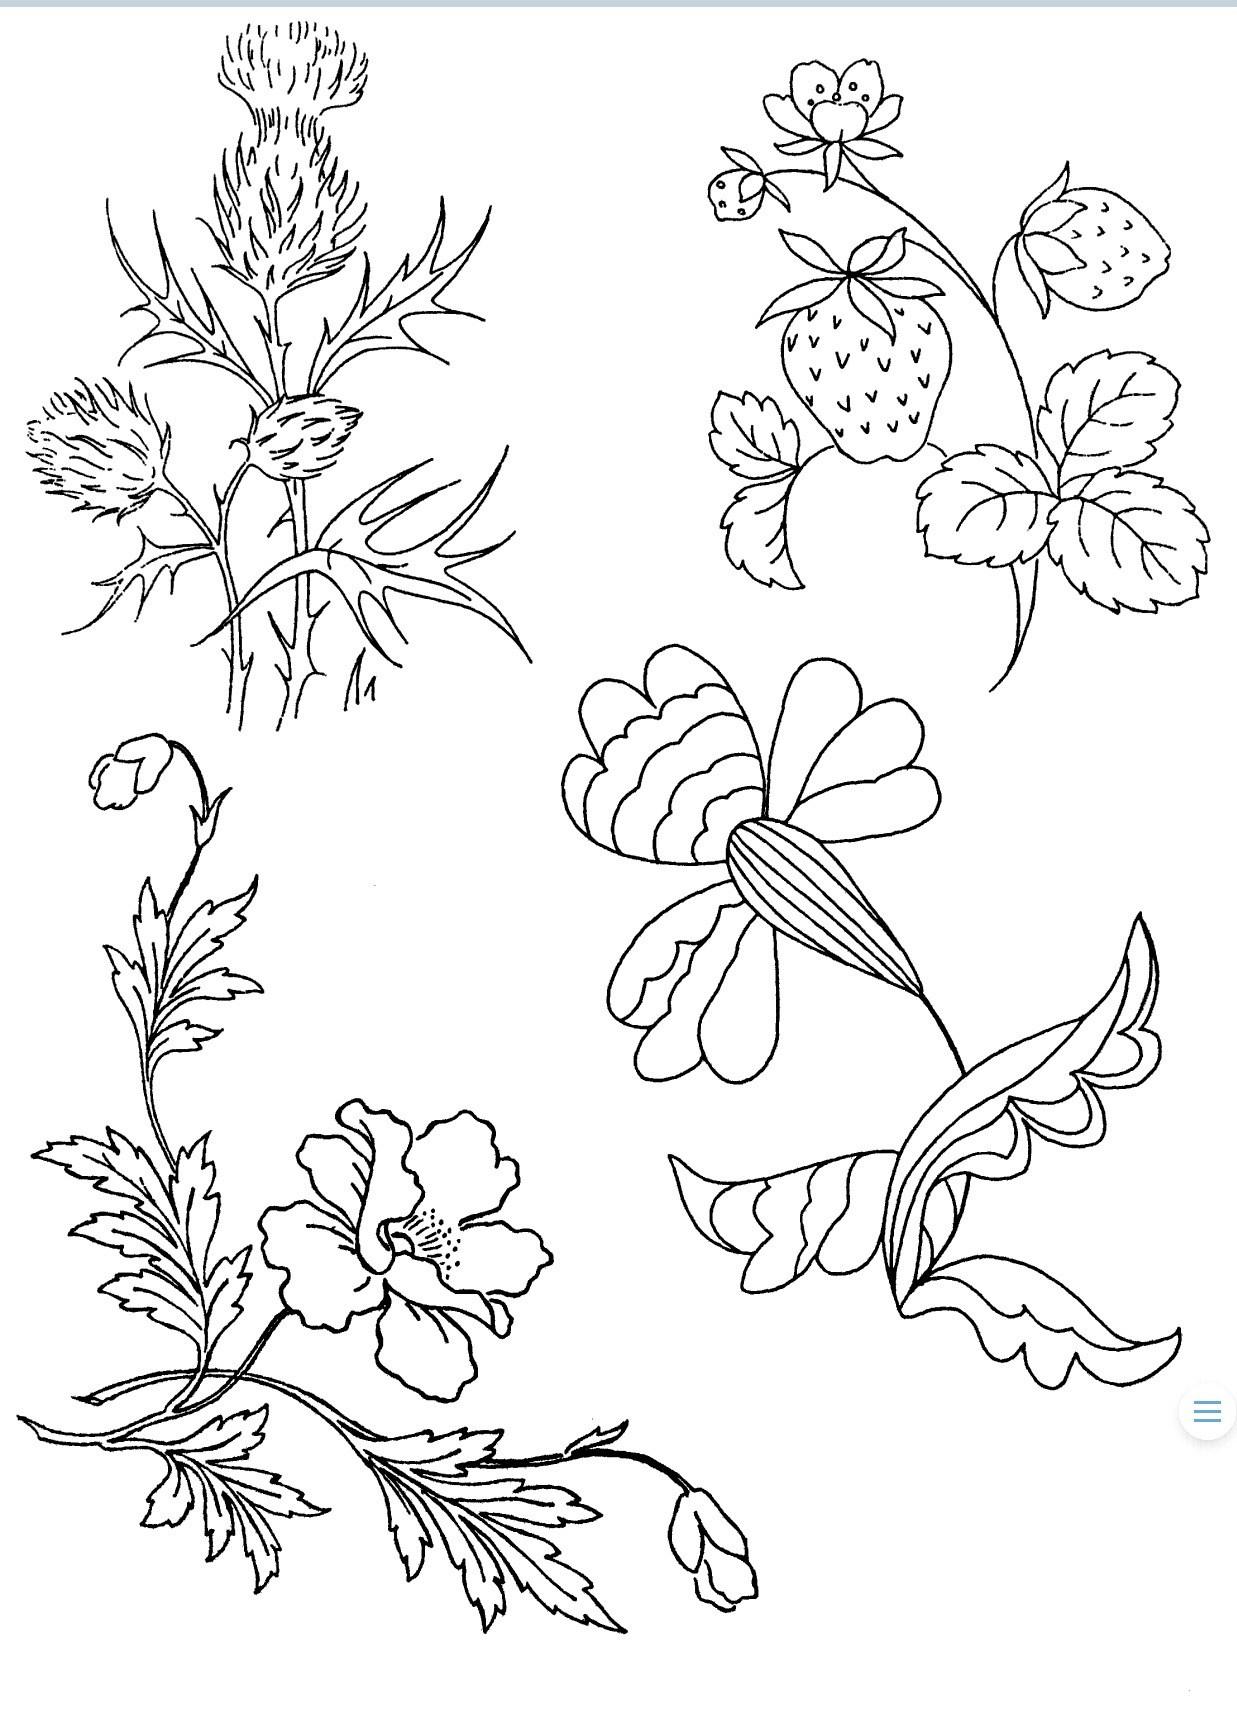 Free Hand Embroidery Patterns To Print Embroidery Patterns Free Pdf Lots Of Patterns